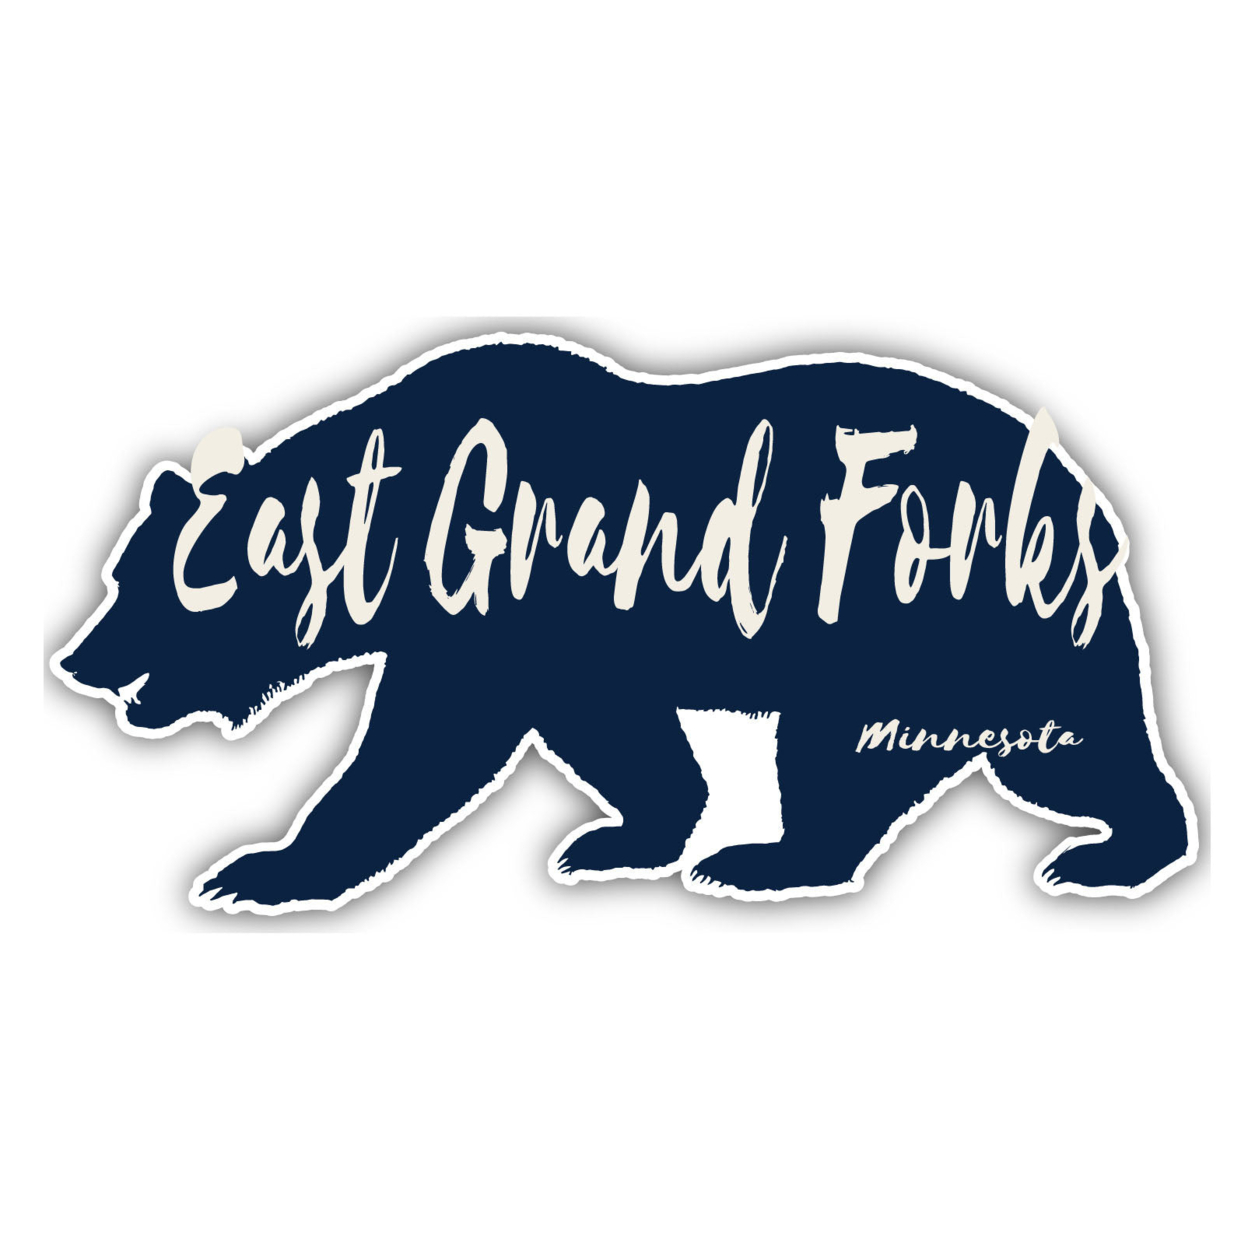 East Grand Forks Minnesota Souvenir Decorative Stickers (Choose Theme And Size) - Single Unit, 10-Inch, Camp Life